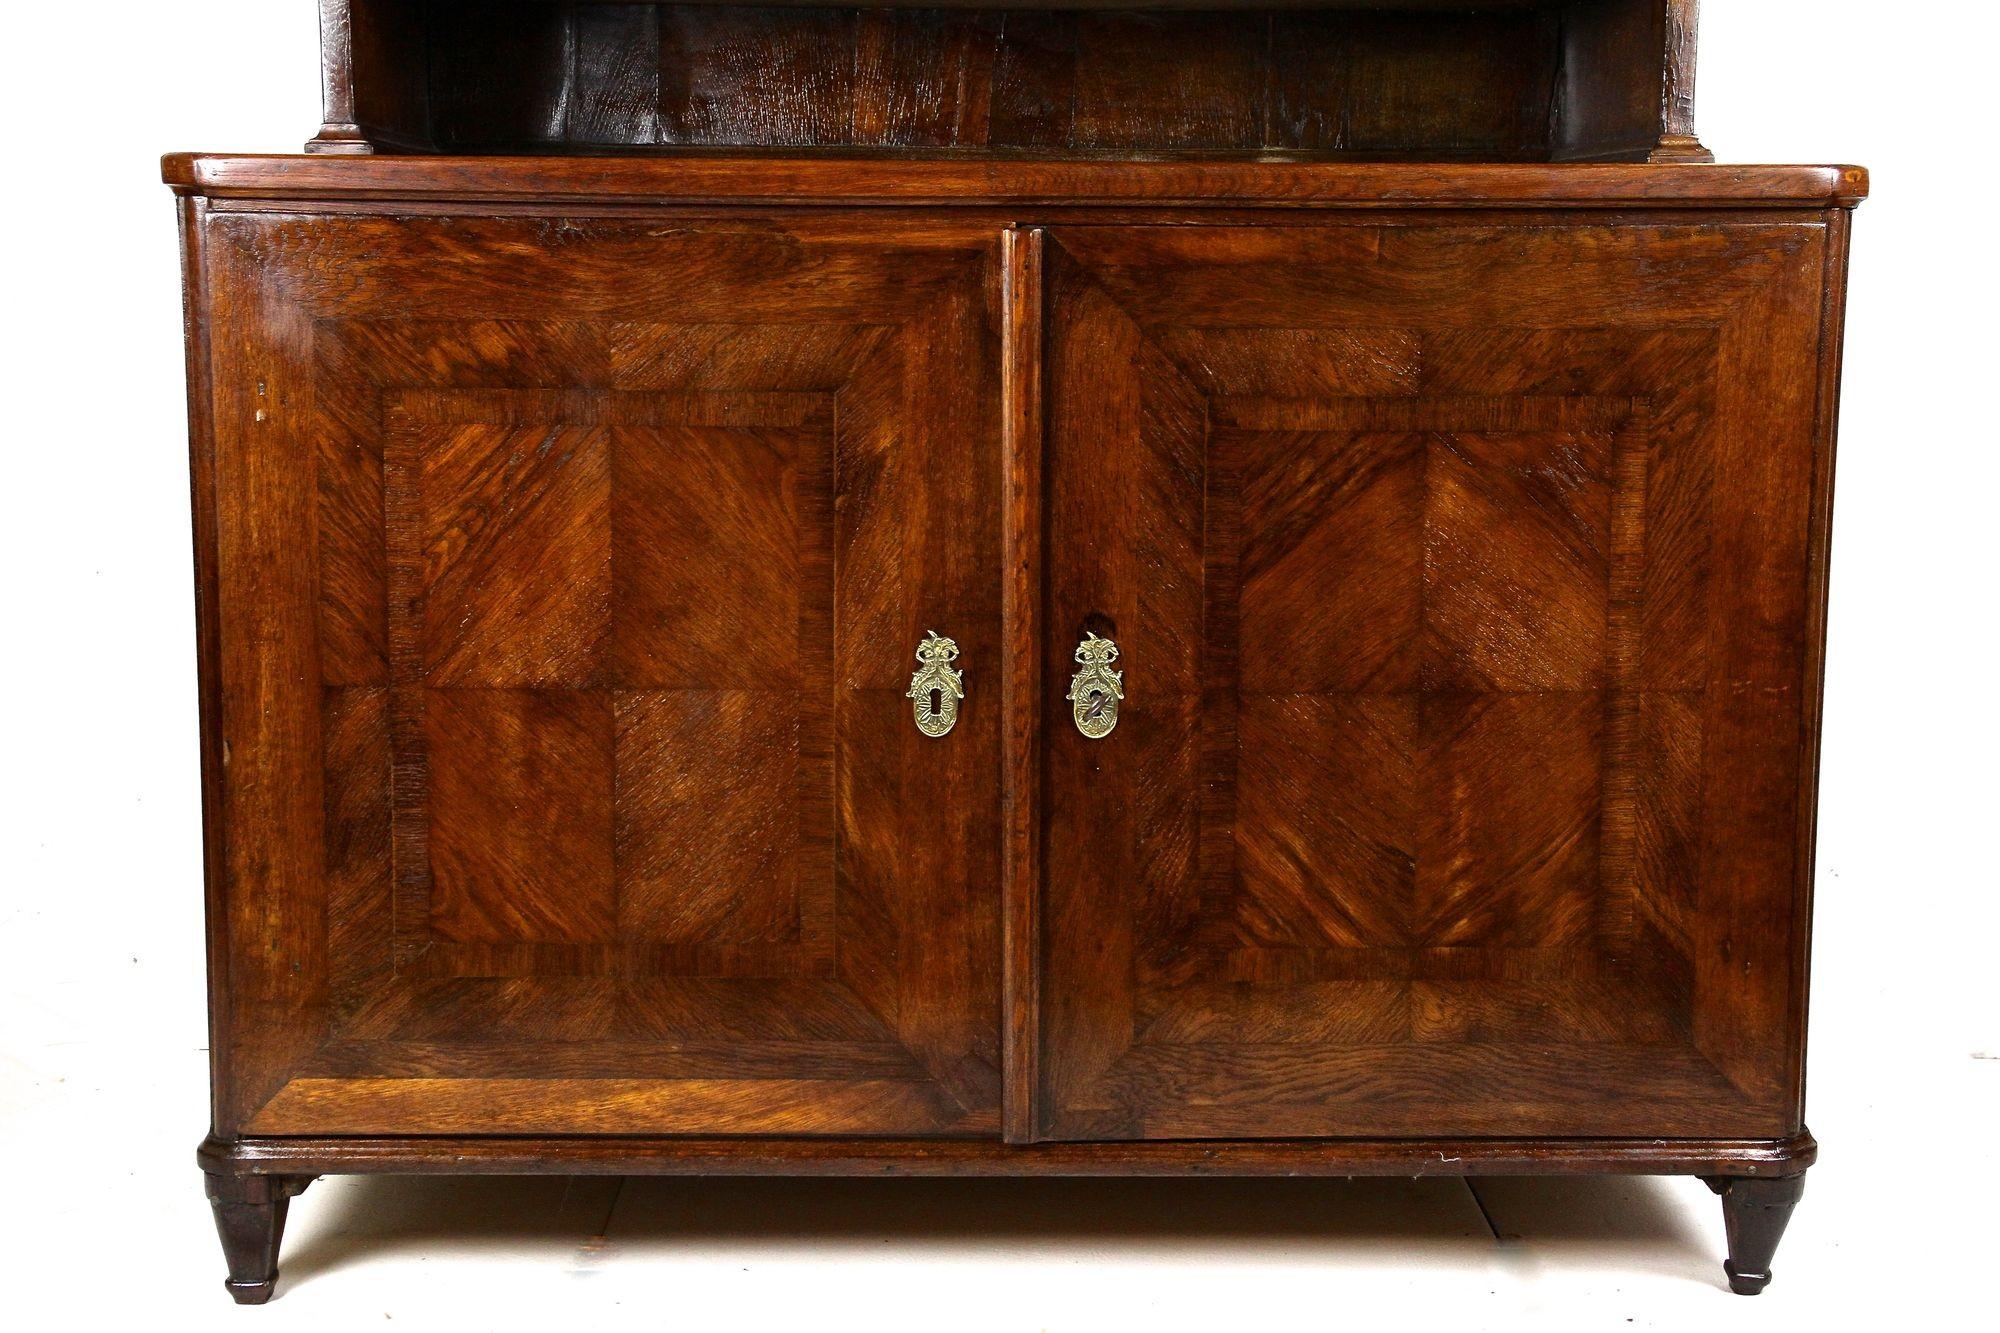 Beautiful late 18th century oakwood cabinet or buffet from the so-called 